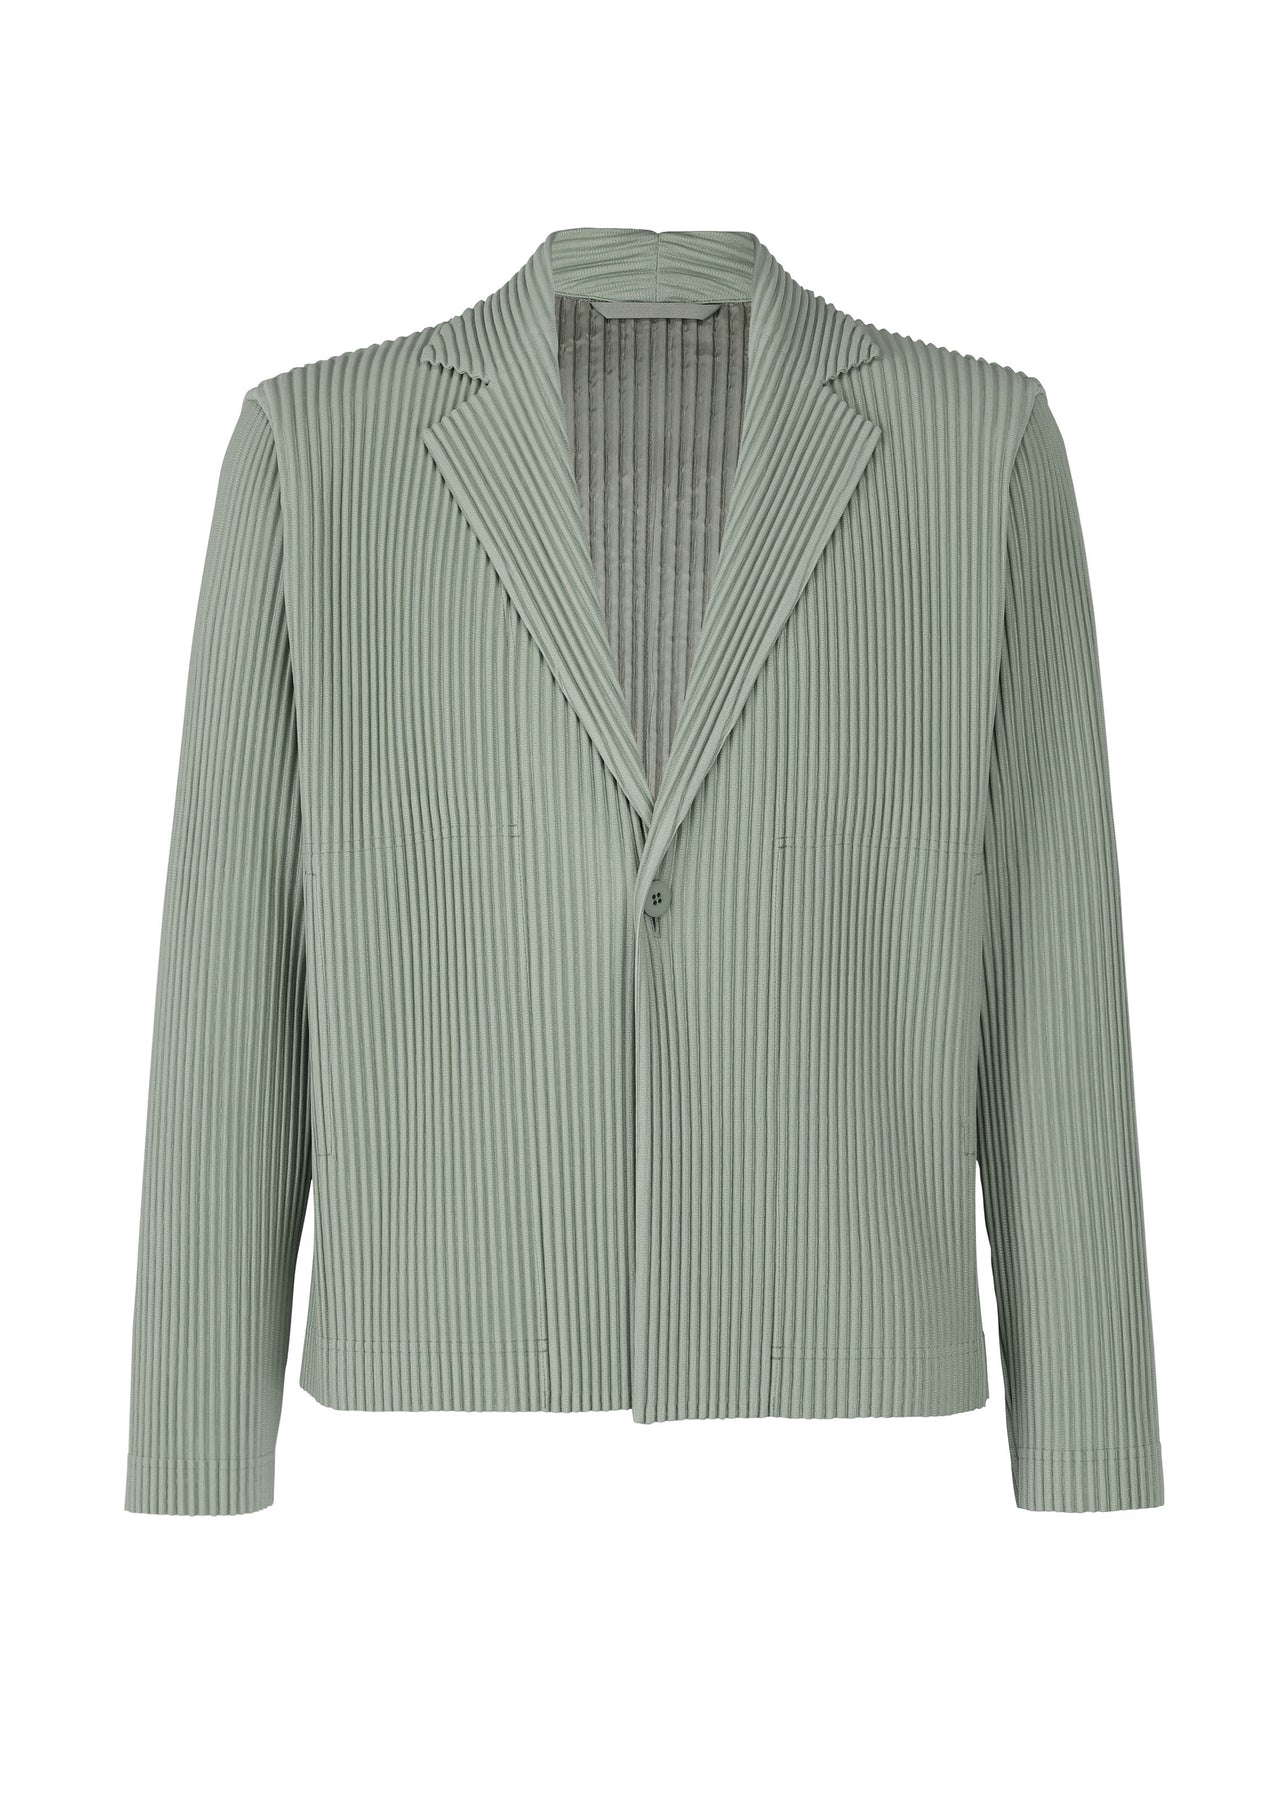 TAILORED PLEATS 2 JACKET | The official ISSEY MIYAKE ONLINE STORE